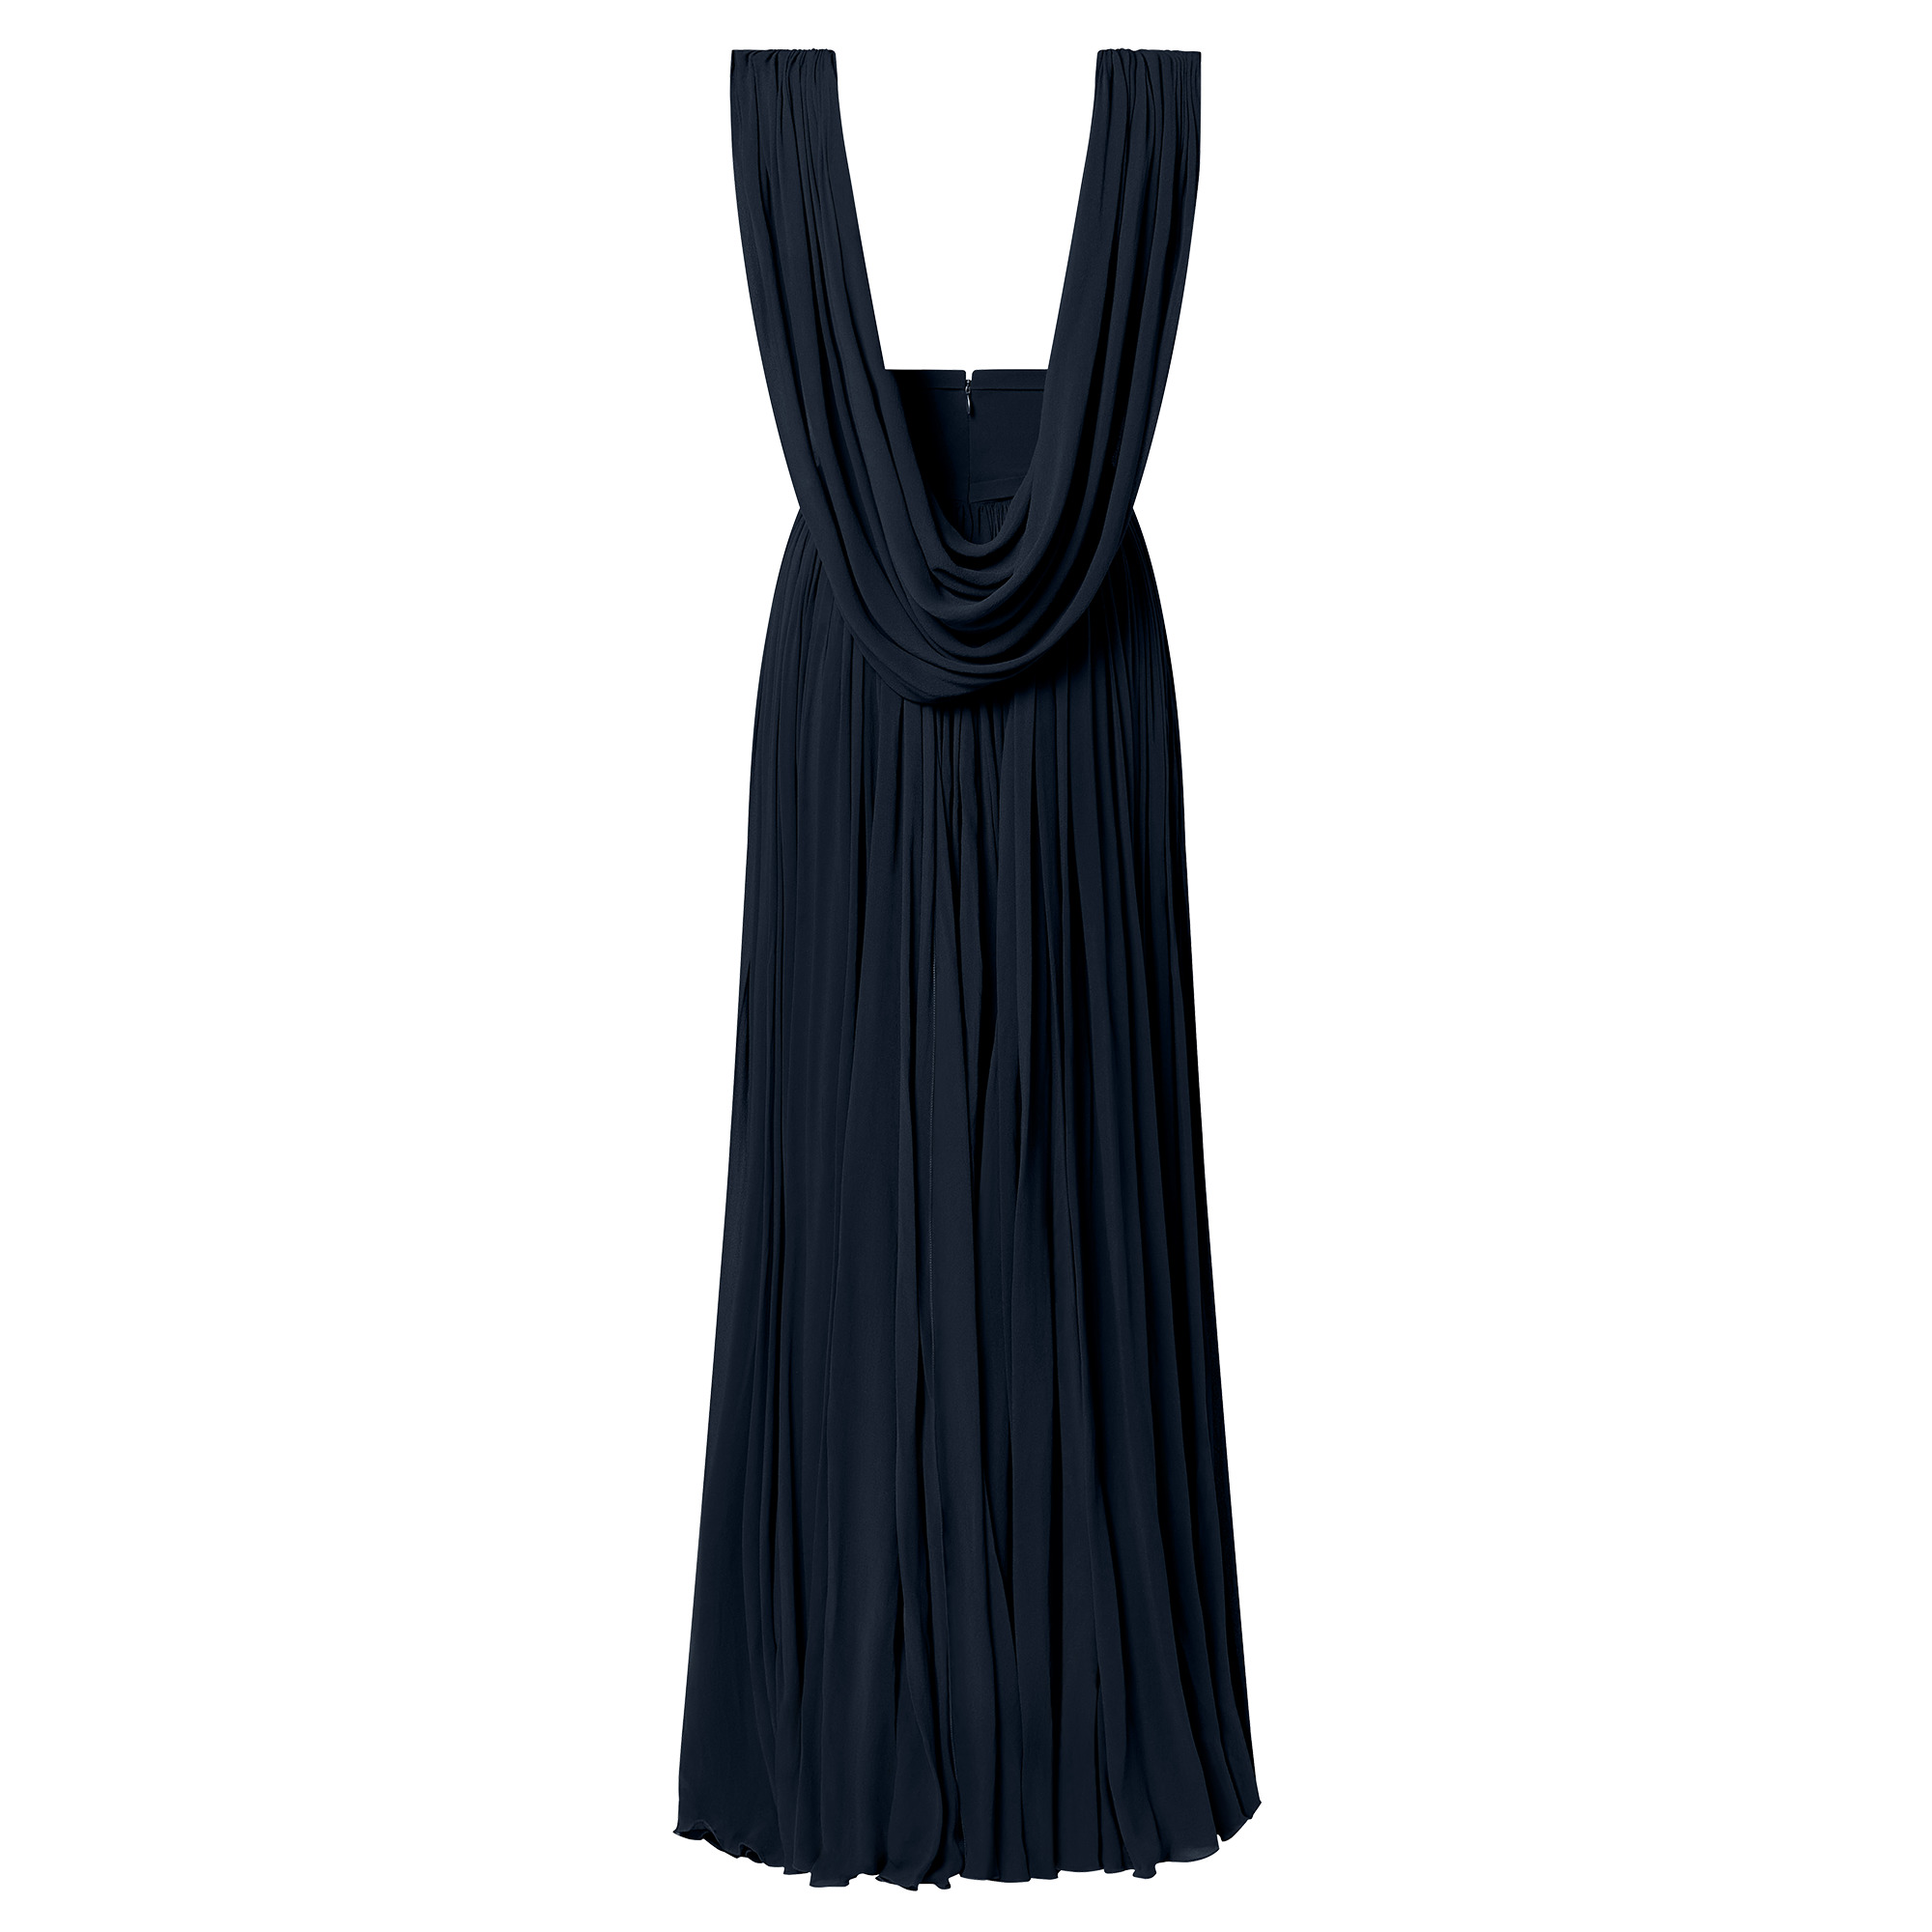 Draped Back Empire Gown - 3